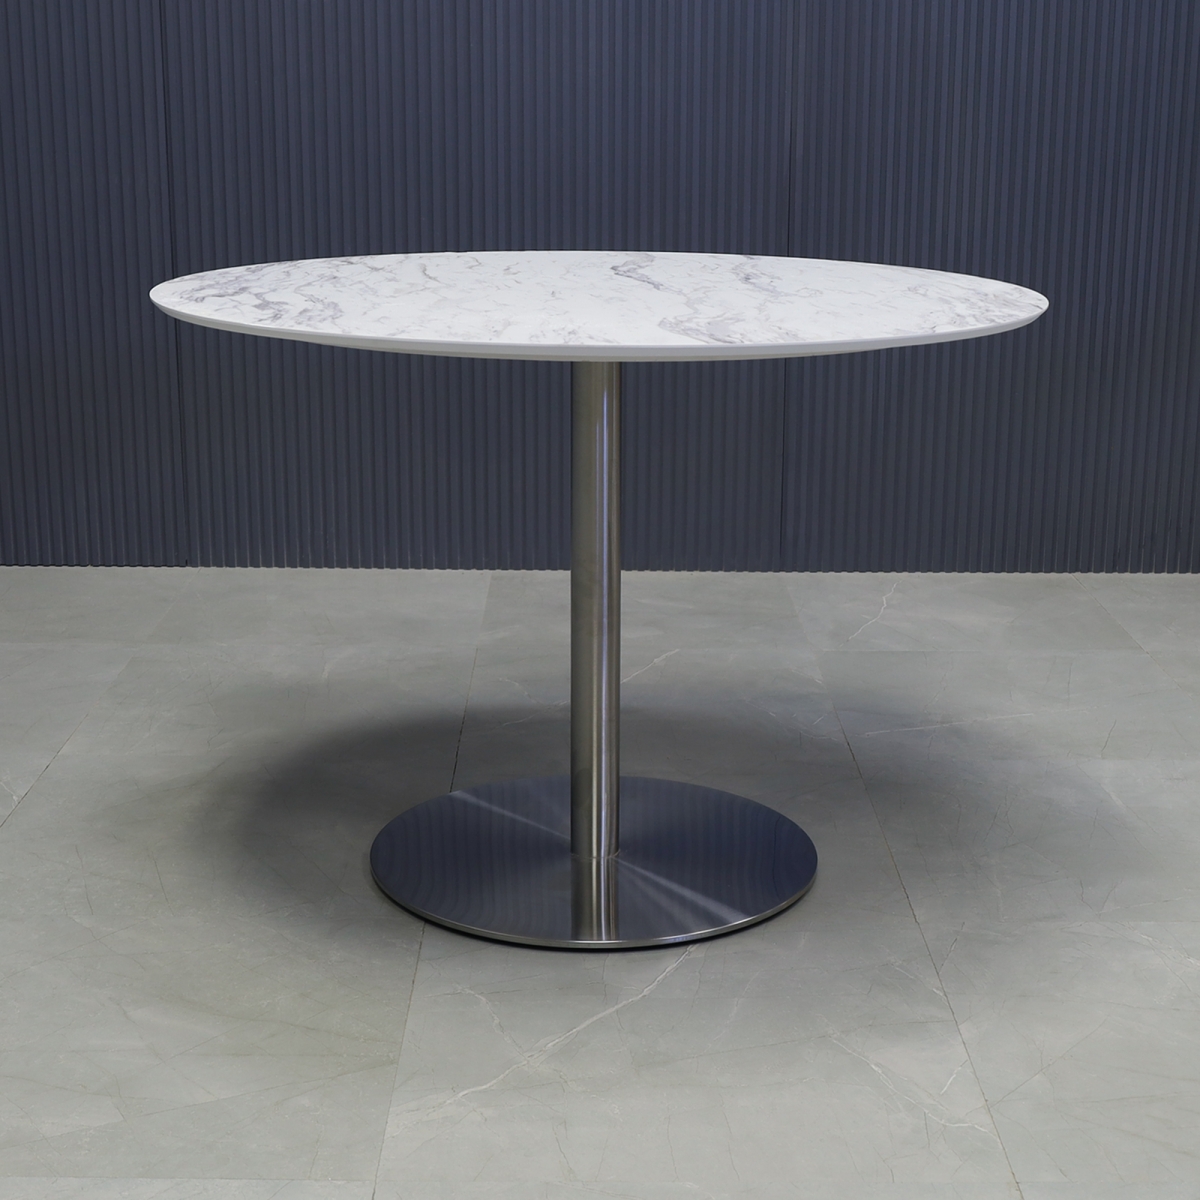 California Round Conference Table with Engineered Stone Top